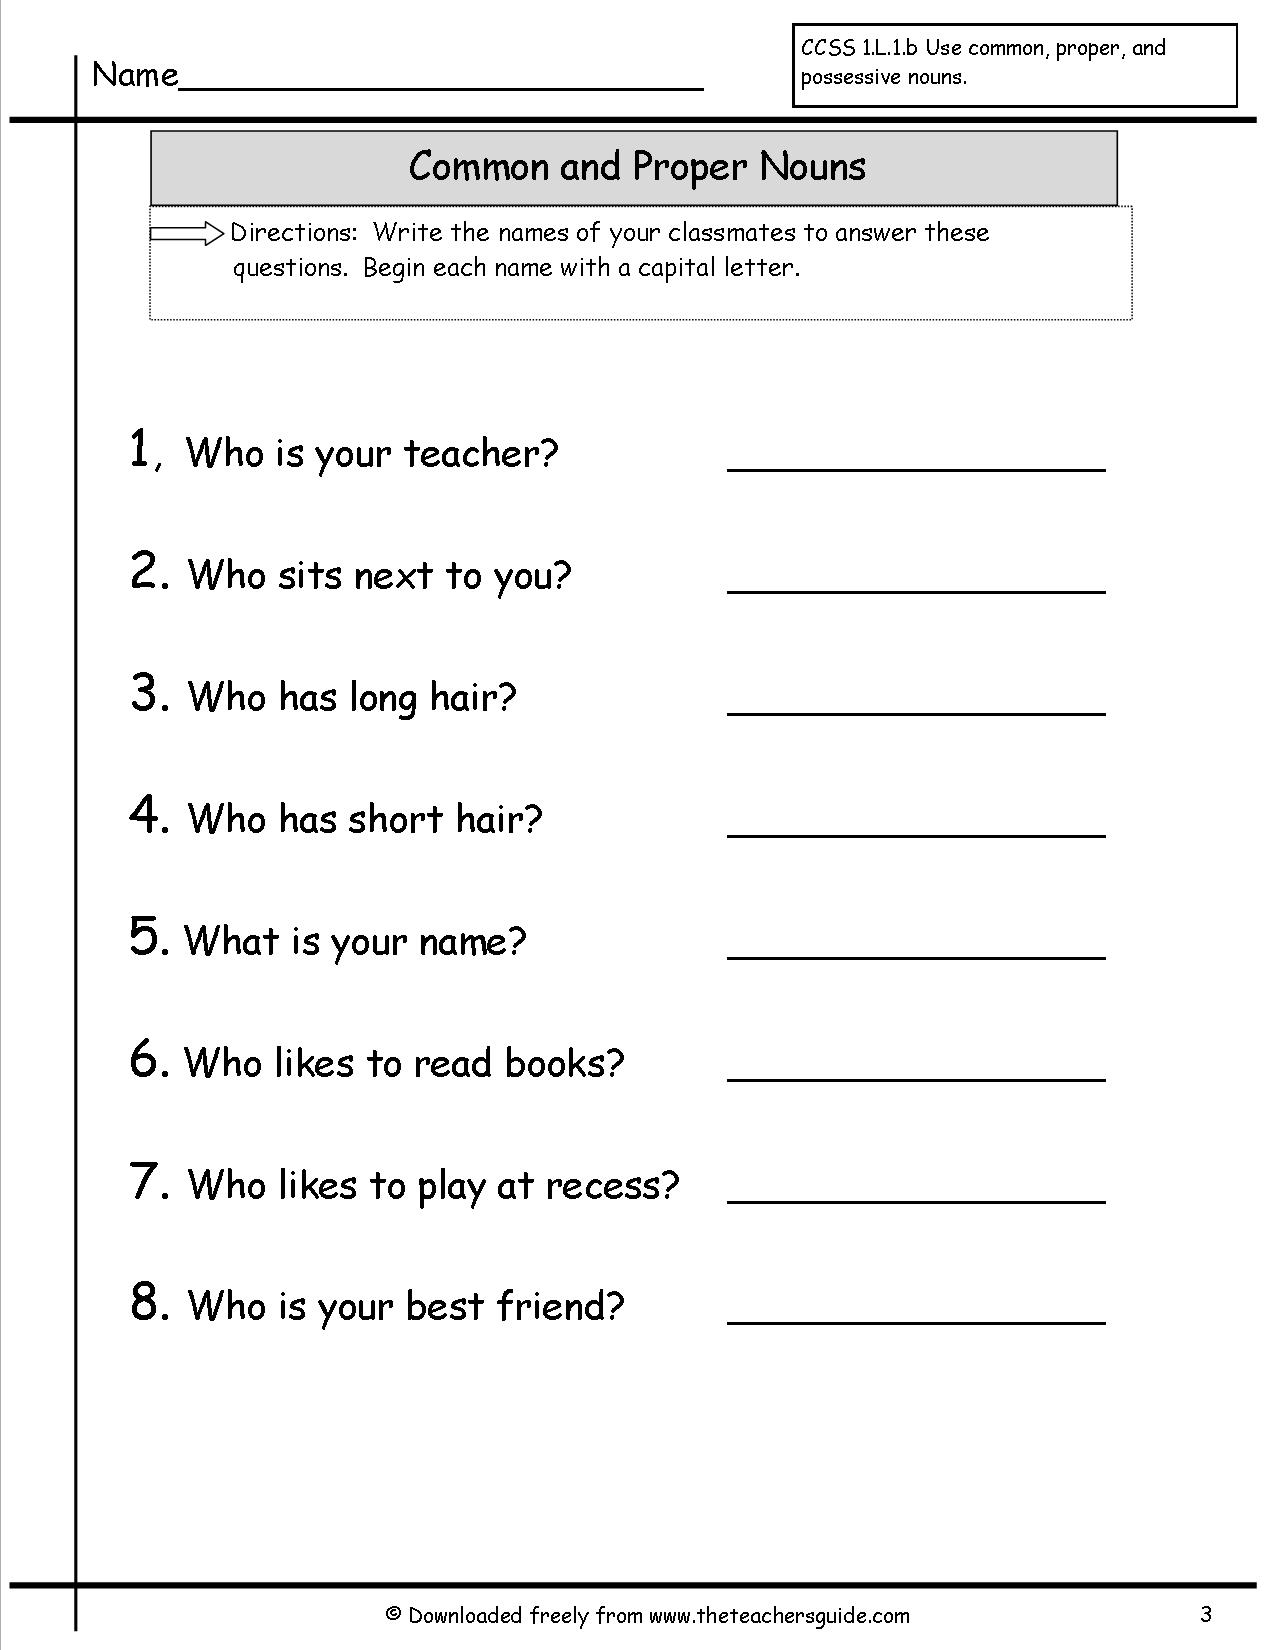 Common And Proper Nouns Proofreading Worksheets Pdf